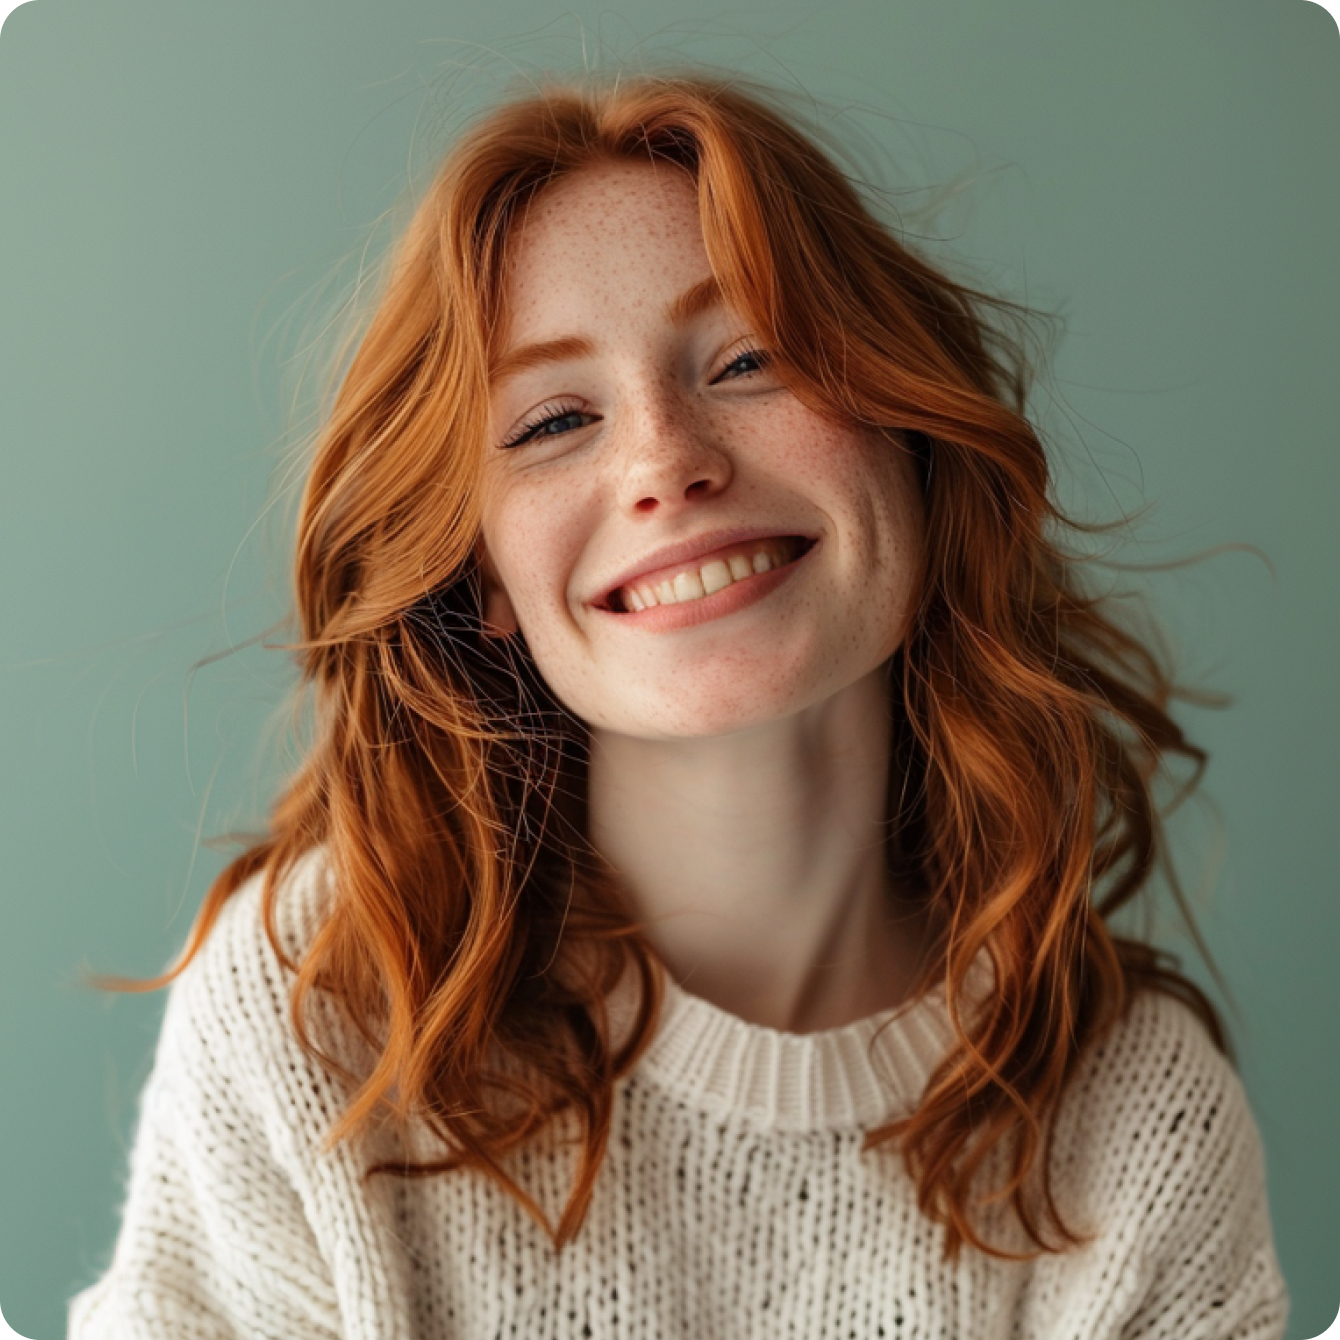 Person with shoulder-length curly red hair wearing a white knitted sweater standing against a teal background.